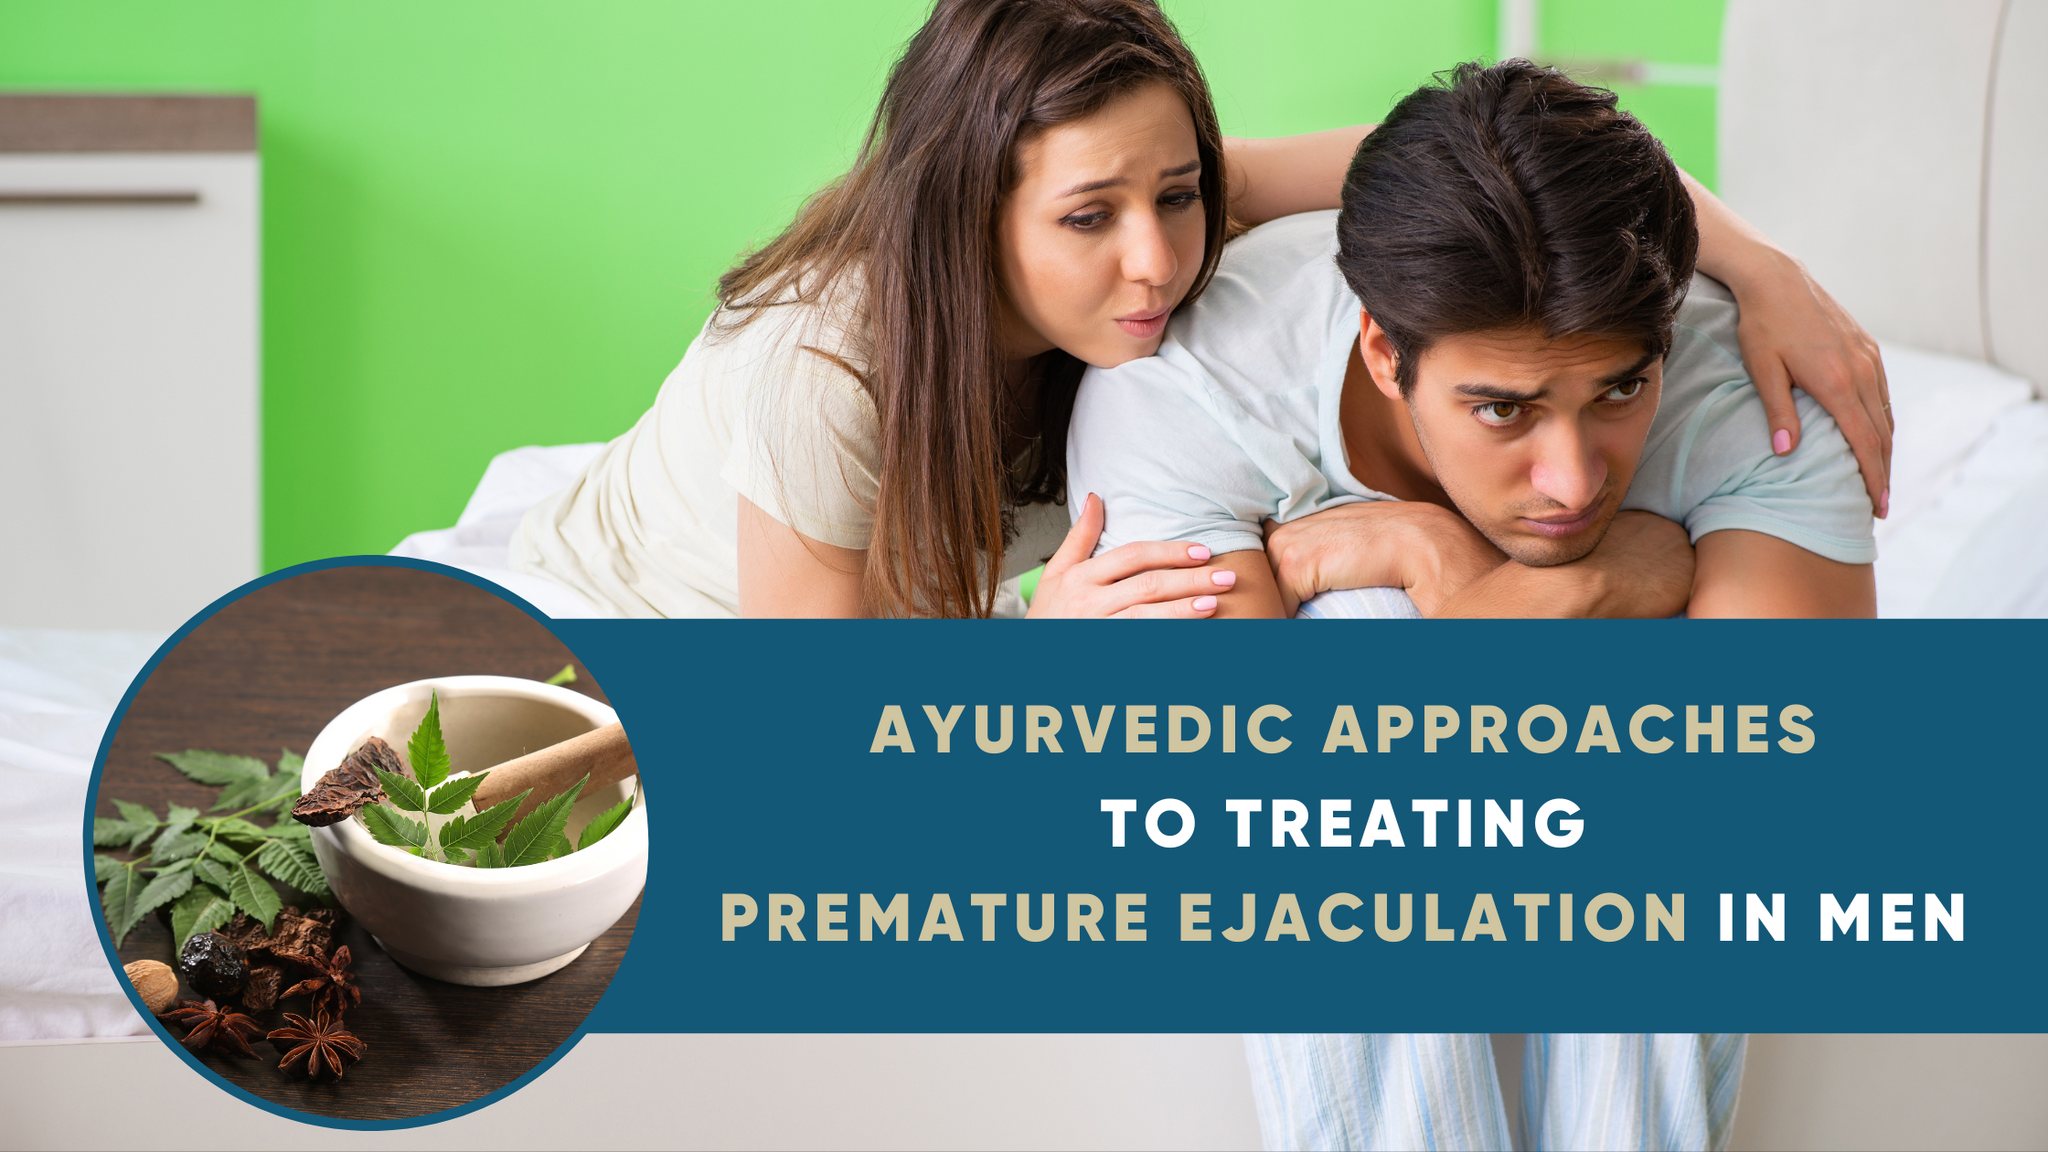 AYURVEDIC APPROACHES TO TREATING PREMATURE EJACULATION IN MEN